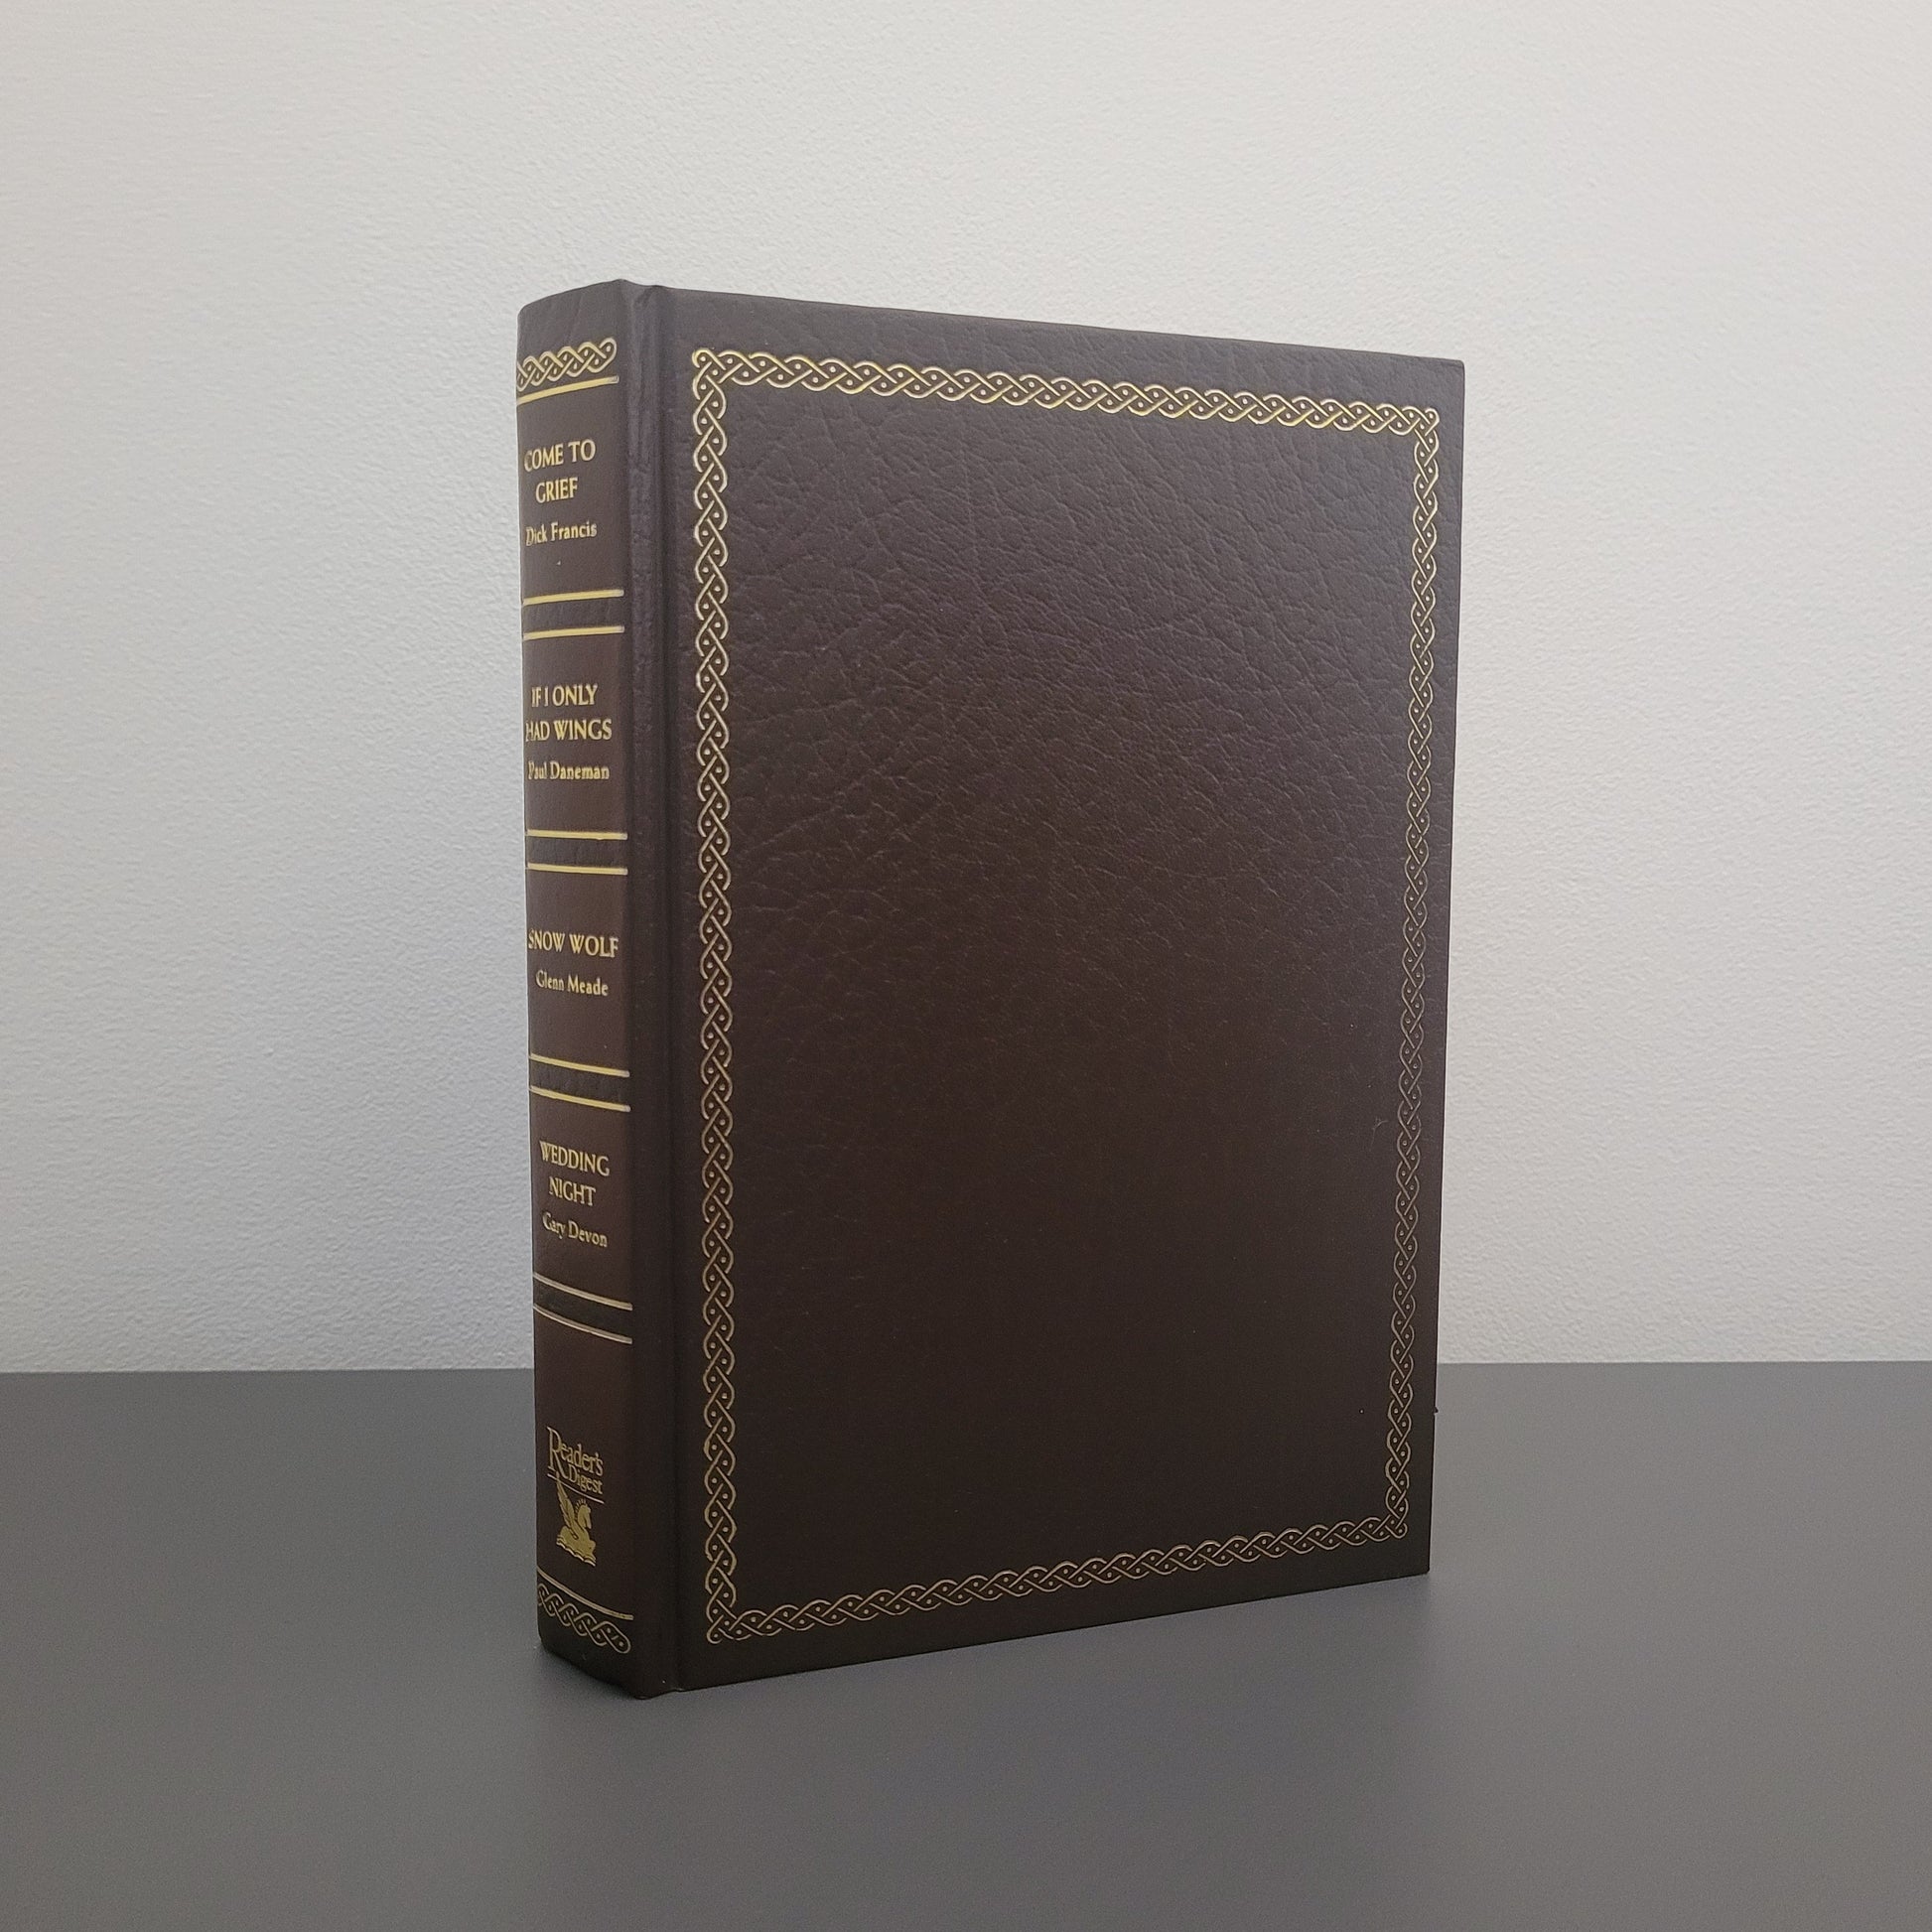 A picture of the front of the book fold - a brown hardback book with a gold border.